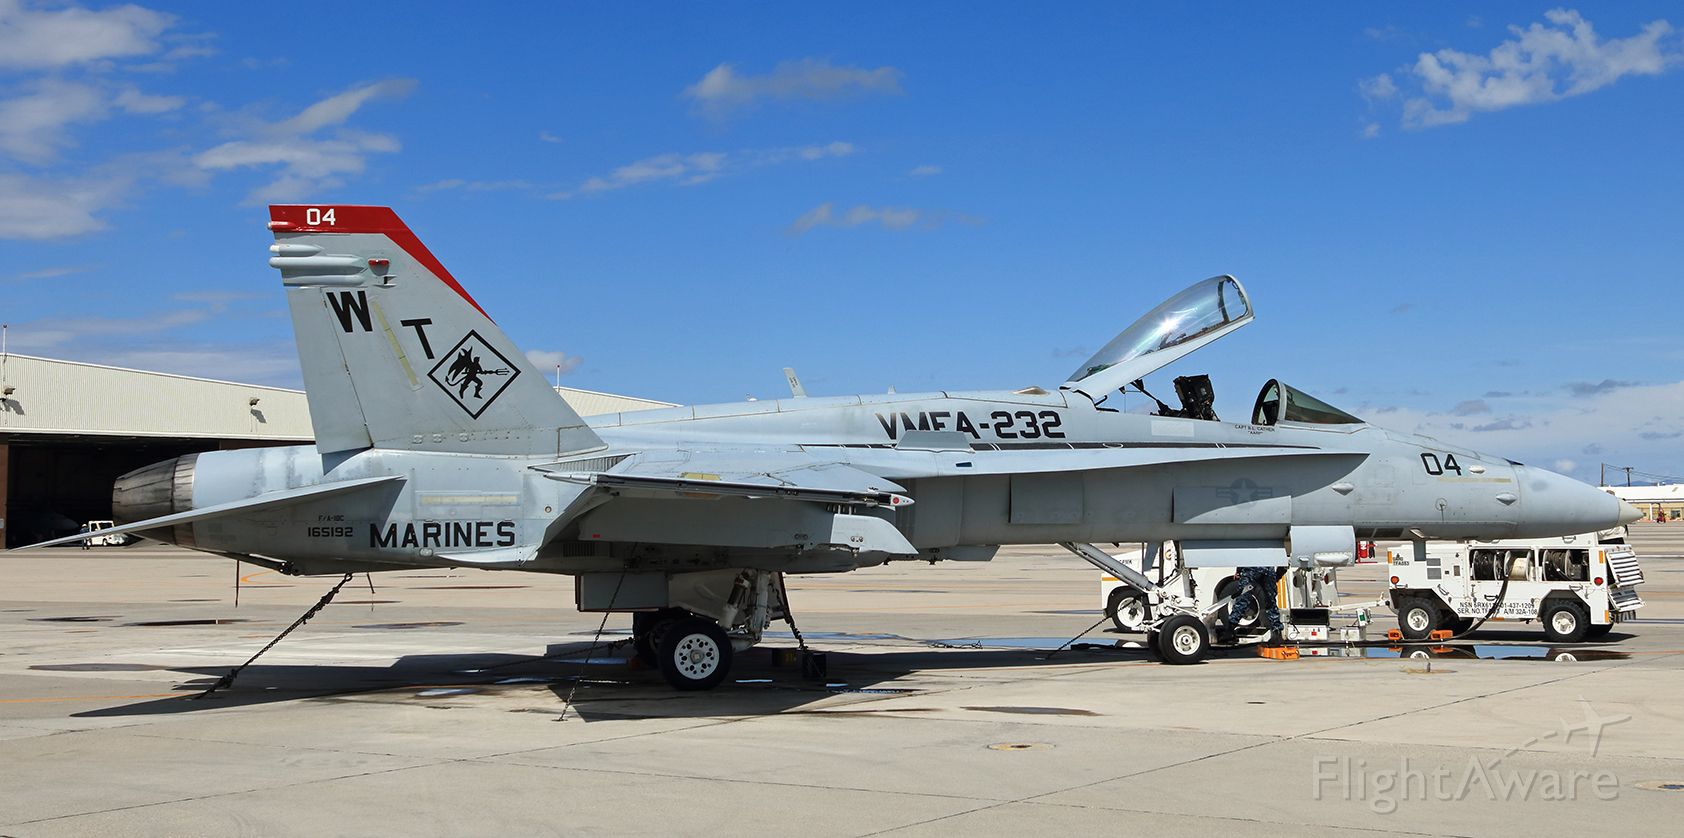 16-5192 — - This photo of 165192, the first picture of the VMFA 232 "Red Devils" F/A-18C Hornet to be posted into the FA photo gallery, was taken only 90 days ago.  Earlier today (just over 6 hours ago, at around 11 AM here), this Bug crashed a few miles southeast of NAS Fallon shortly after taking off on a maintenance check flight.  Fortunately, the pilot ejected safely prior to the crash and walked away from the crash site.